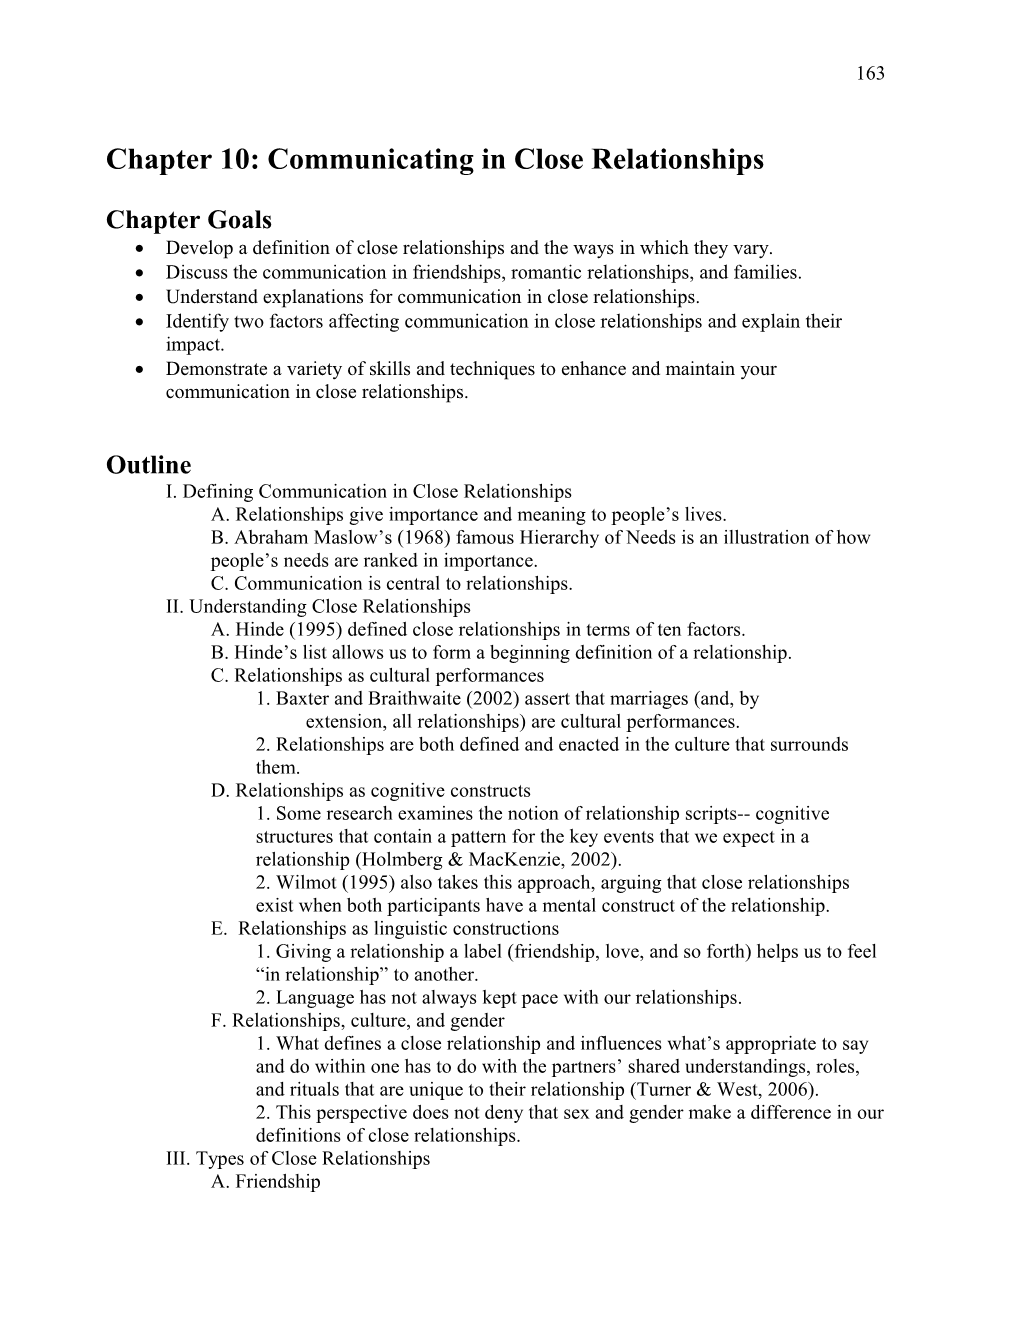 Chapter 10: Communicating In Close Relationships